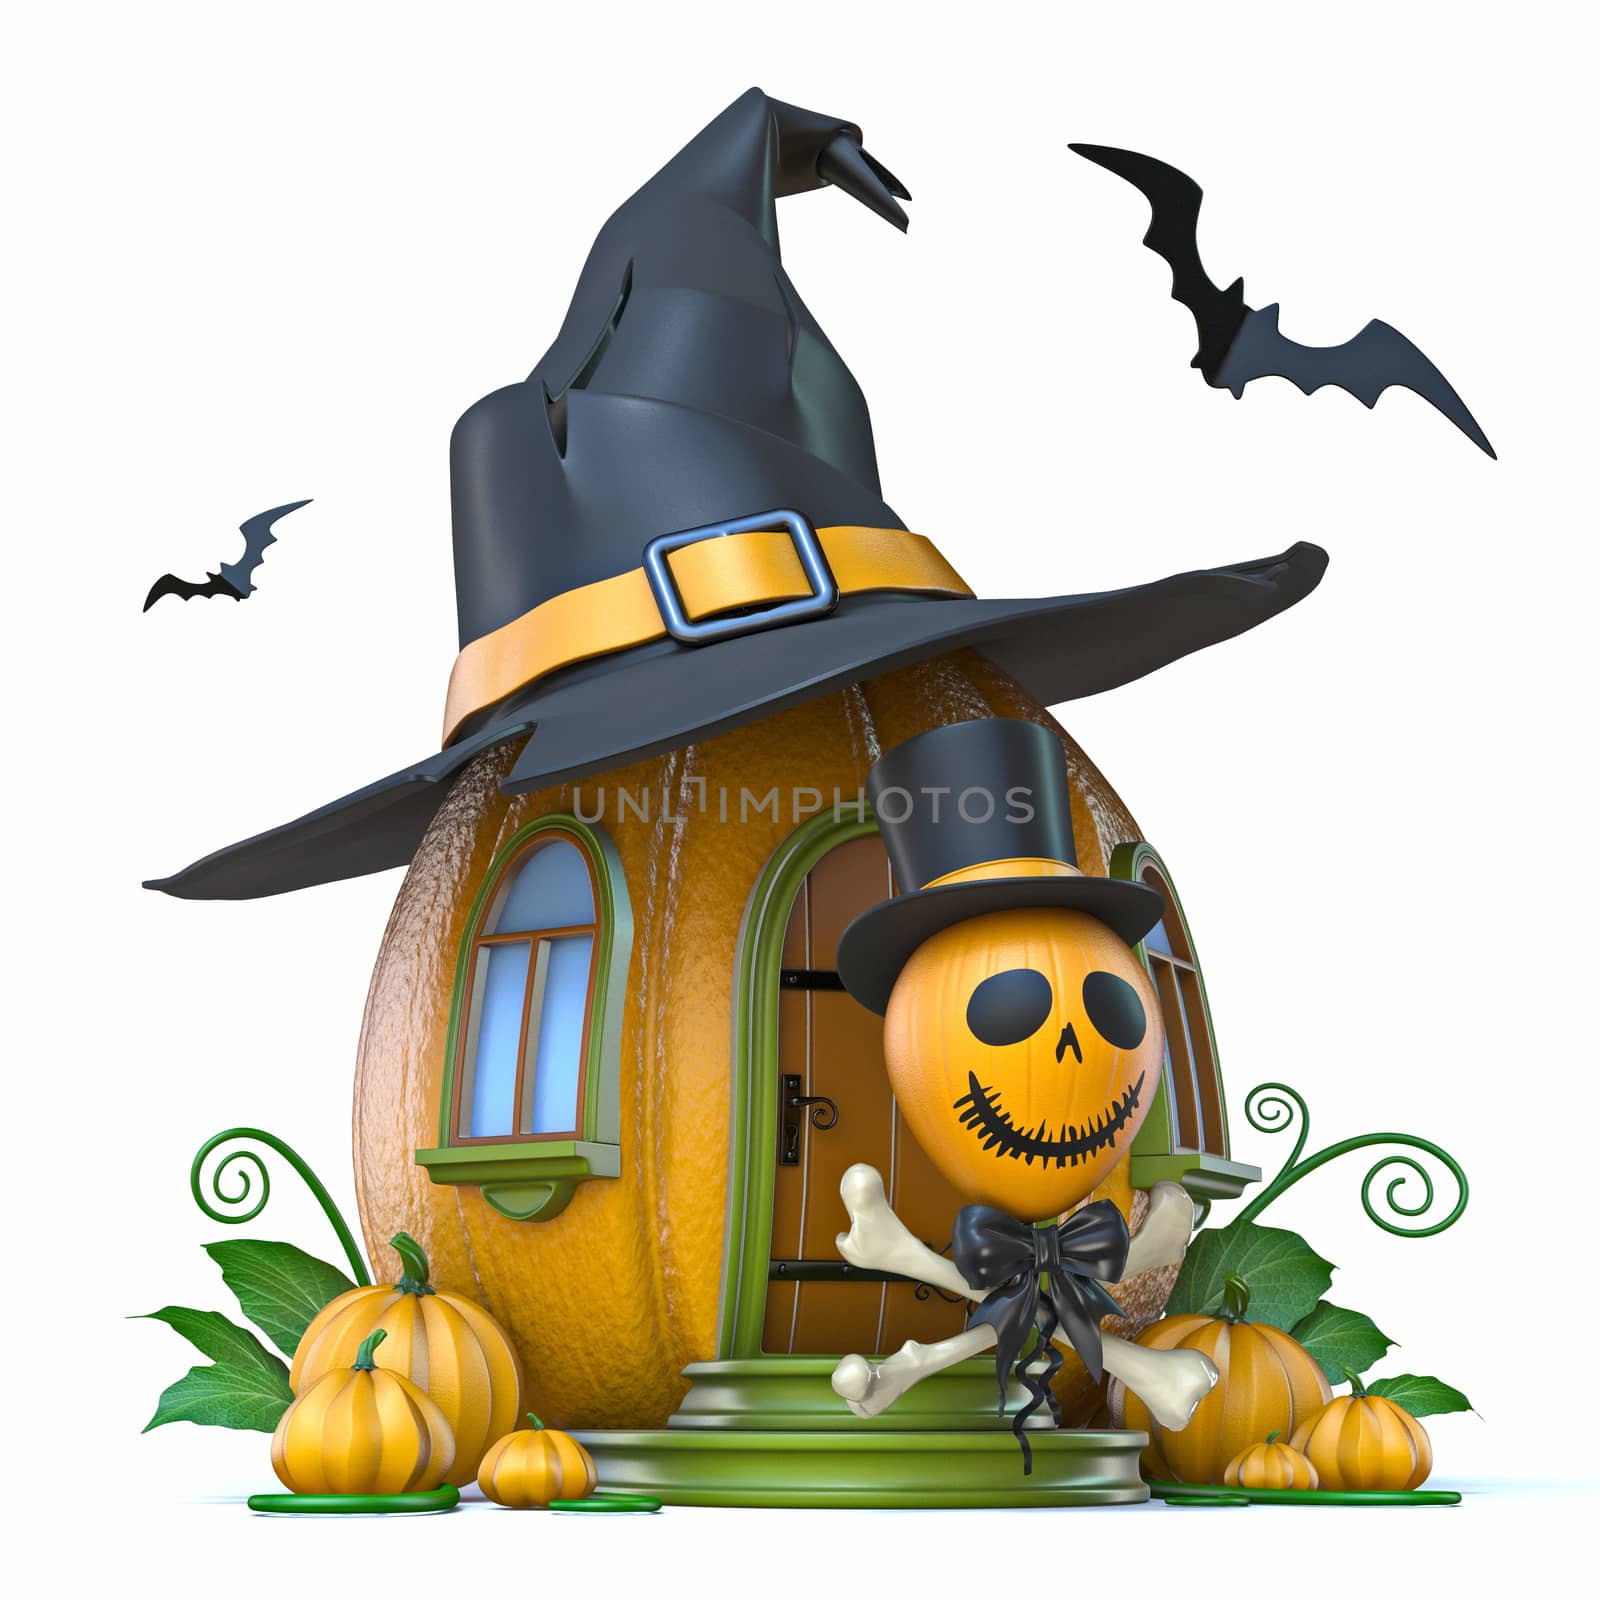 Jack O Lantern in front of pumpkin house 3D render illustration isolated on white background